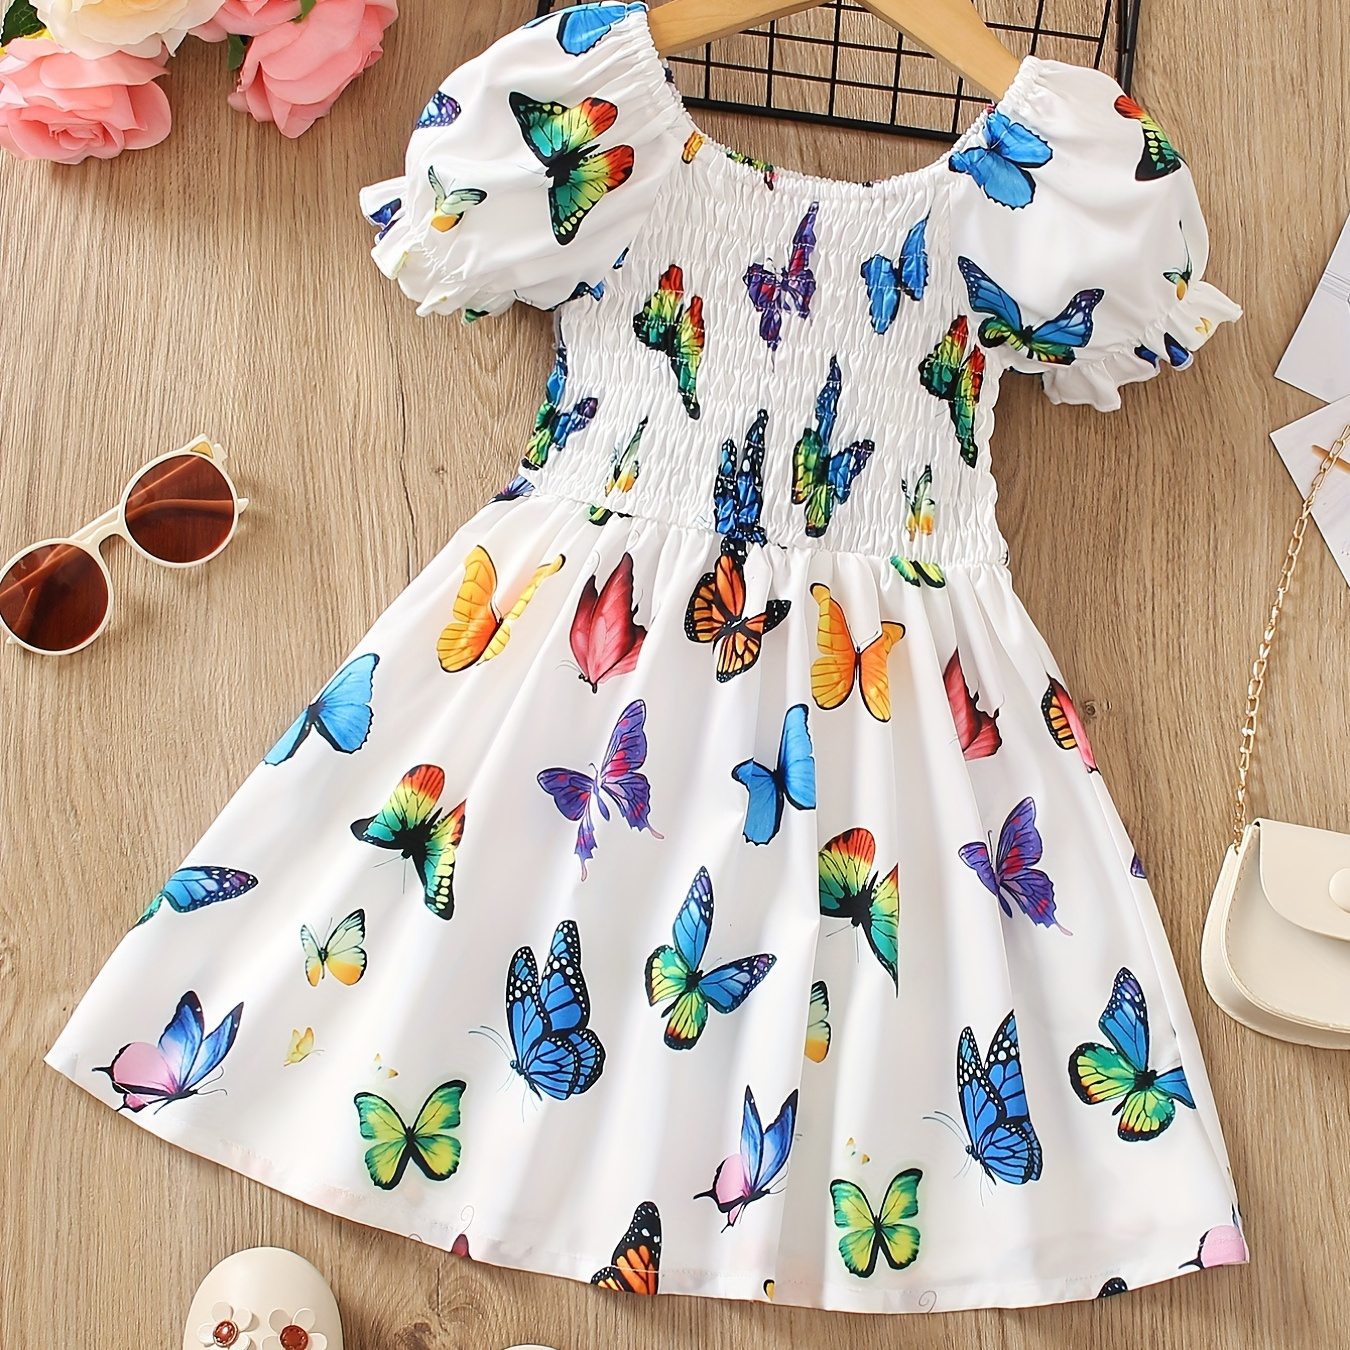 

Toddler Girls Puff Sleeve Frill Trim Shirred Colorful Butterfly Graphic Princess Dress For Party Beach Vacation, Cute Romantic Kids Summer Clothes